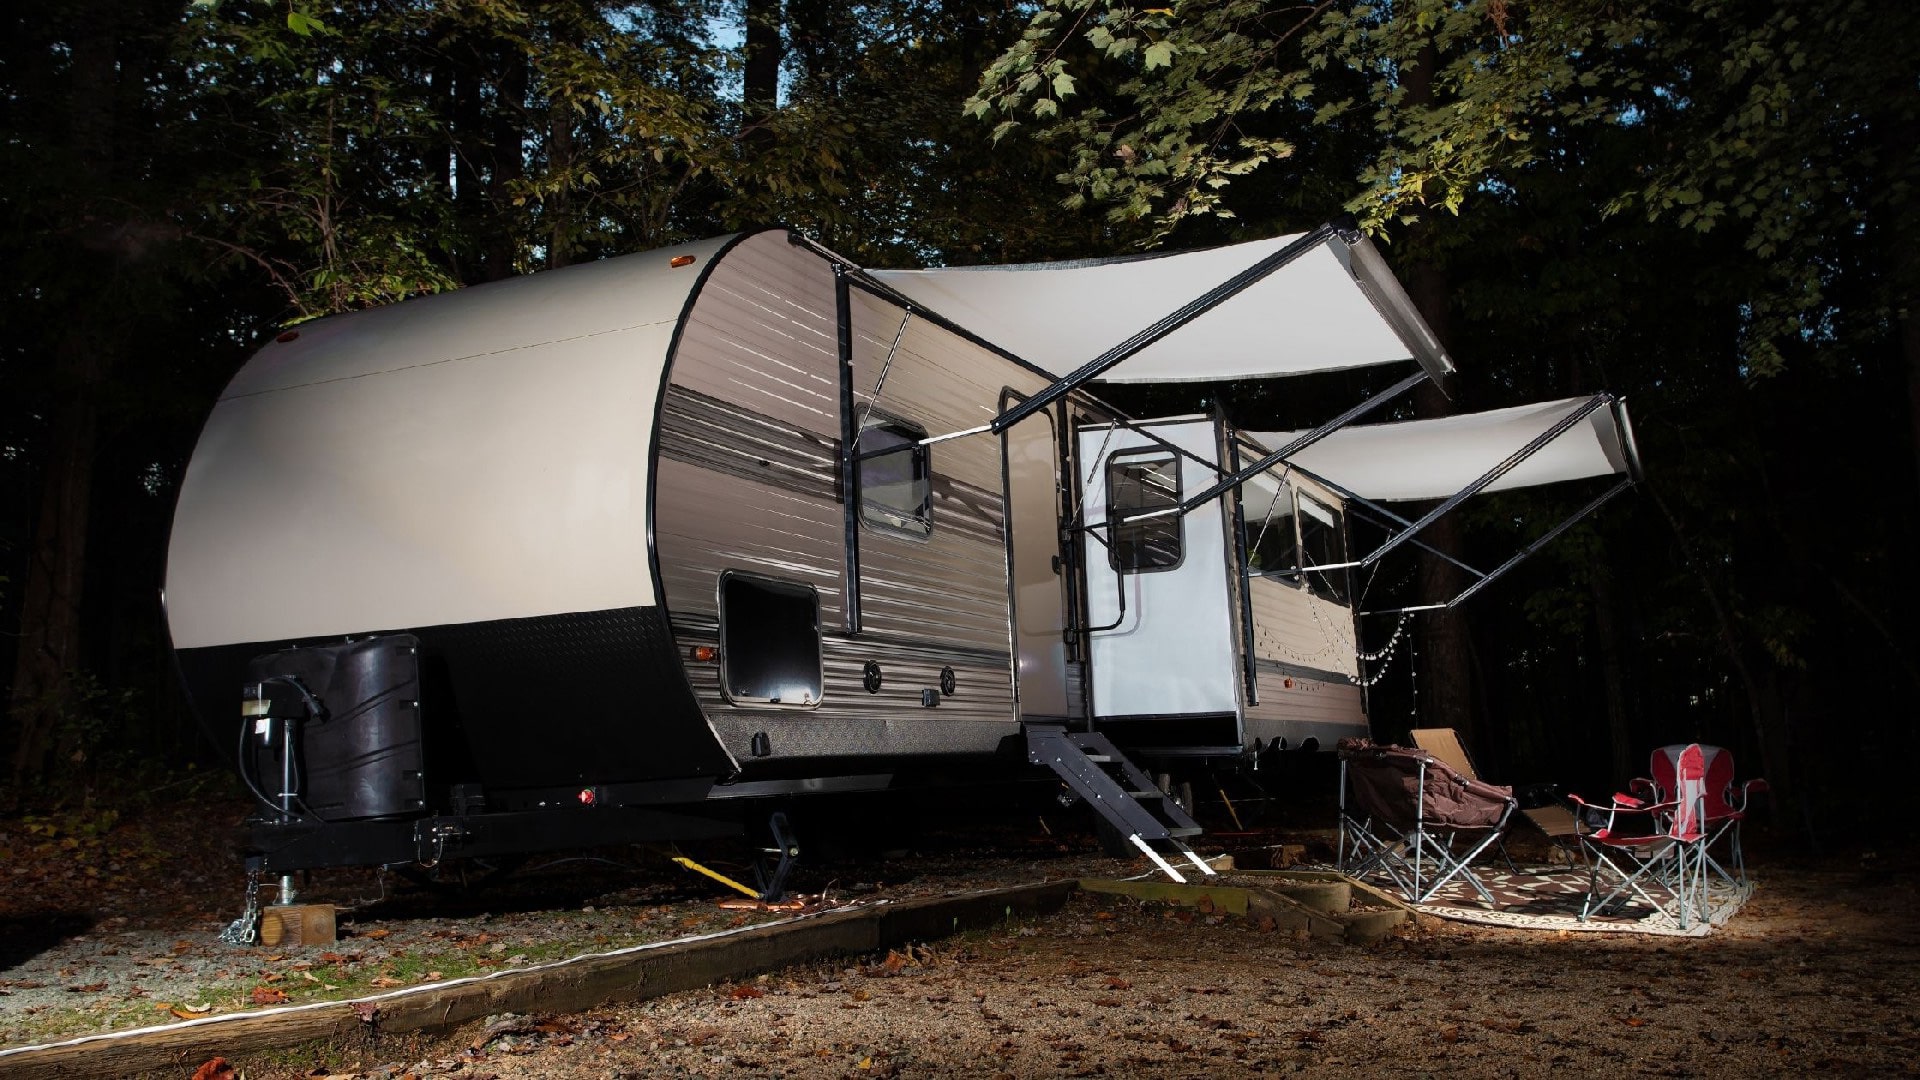 How To Level a Travel Trailer